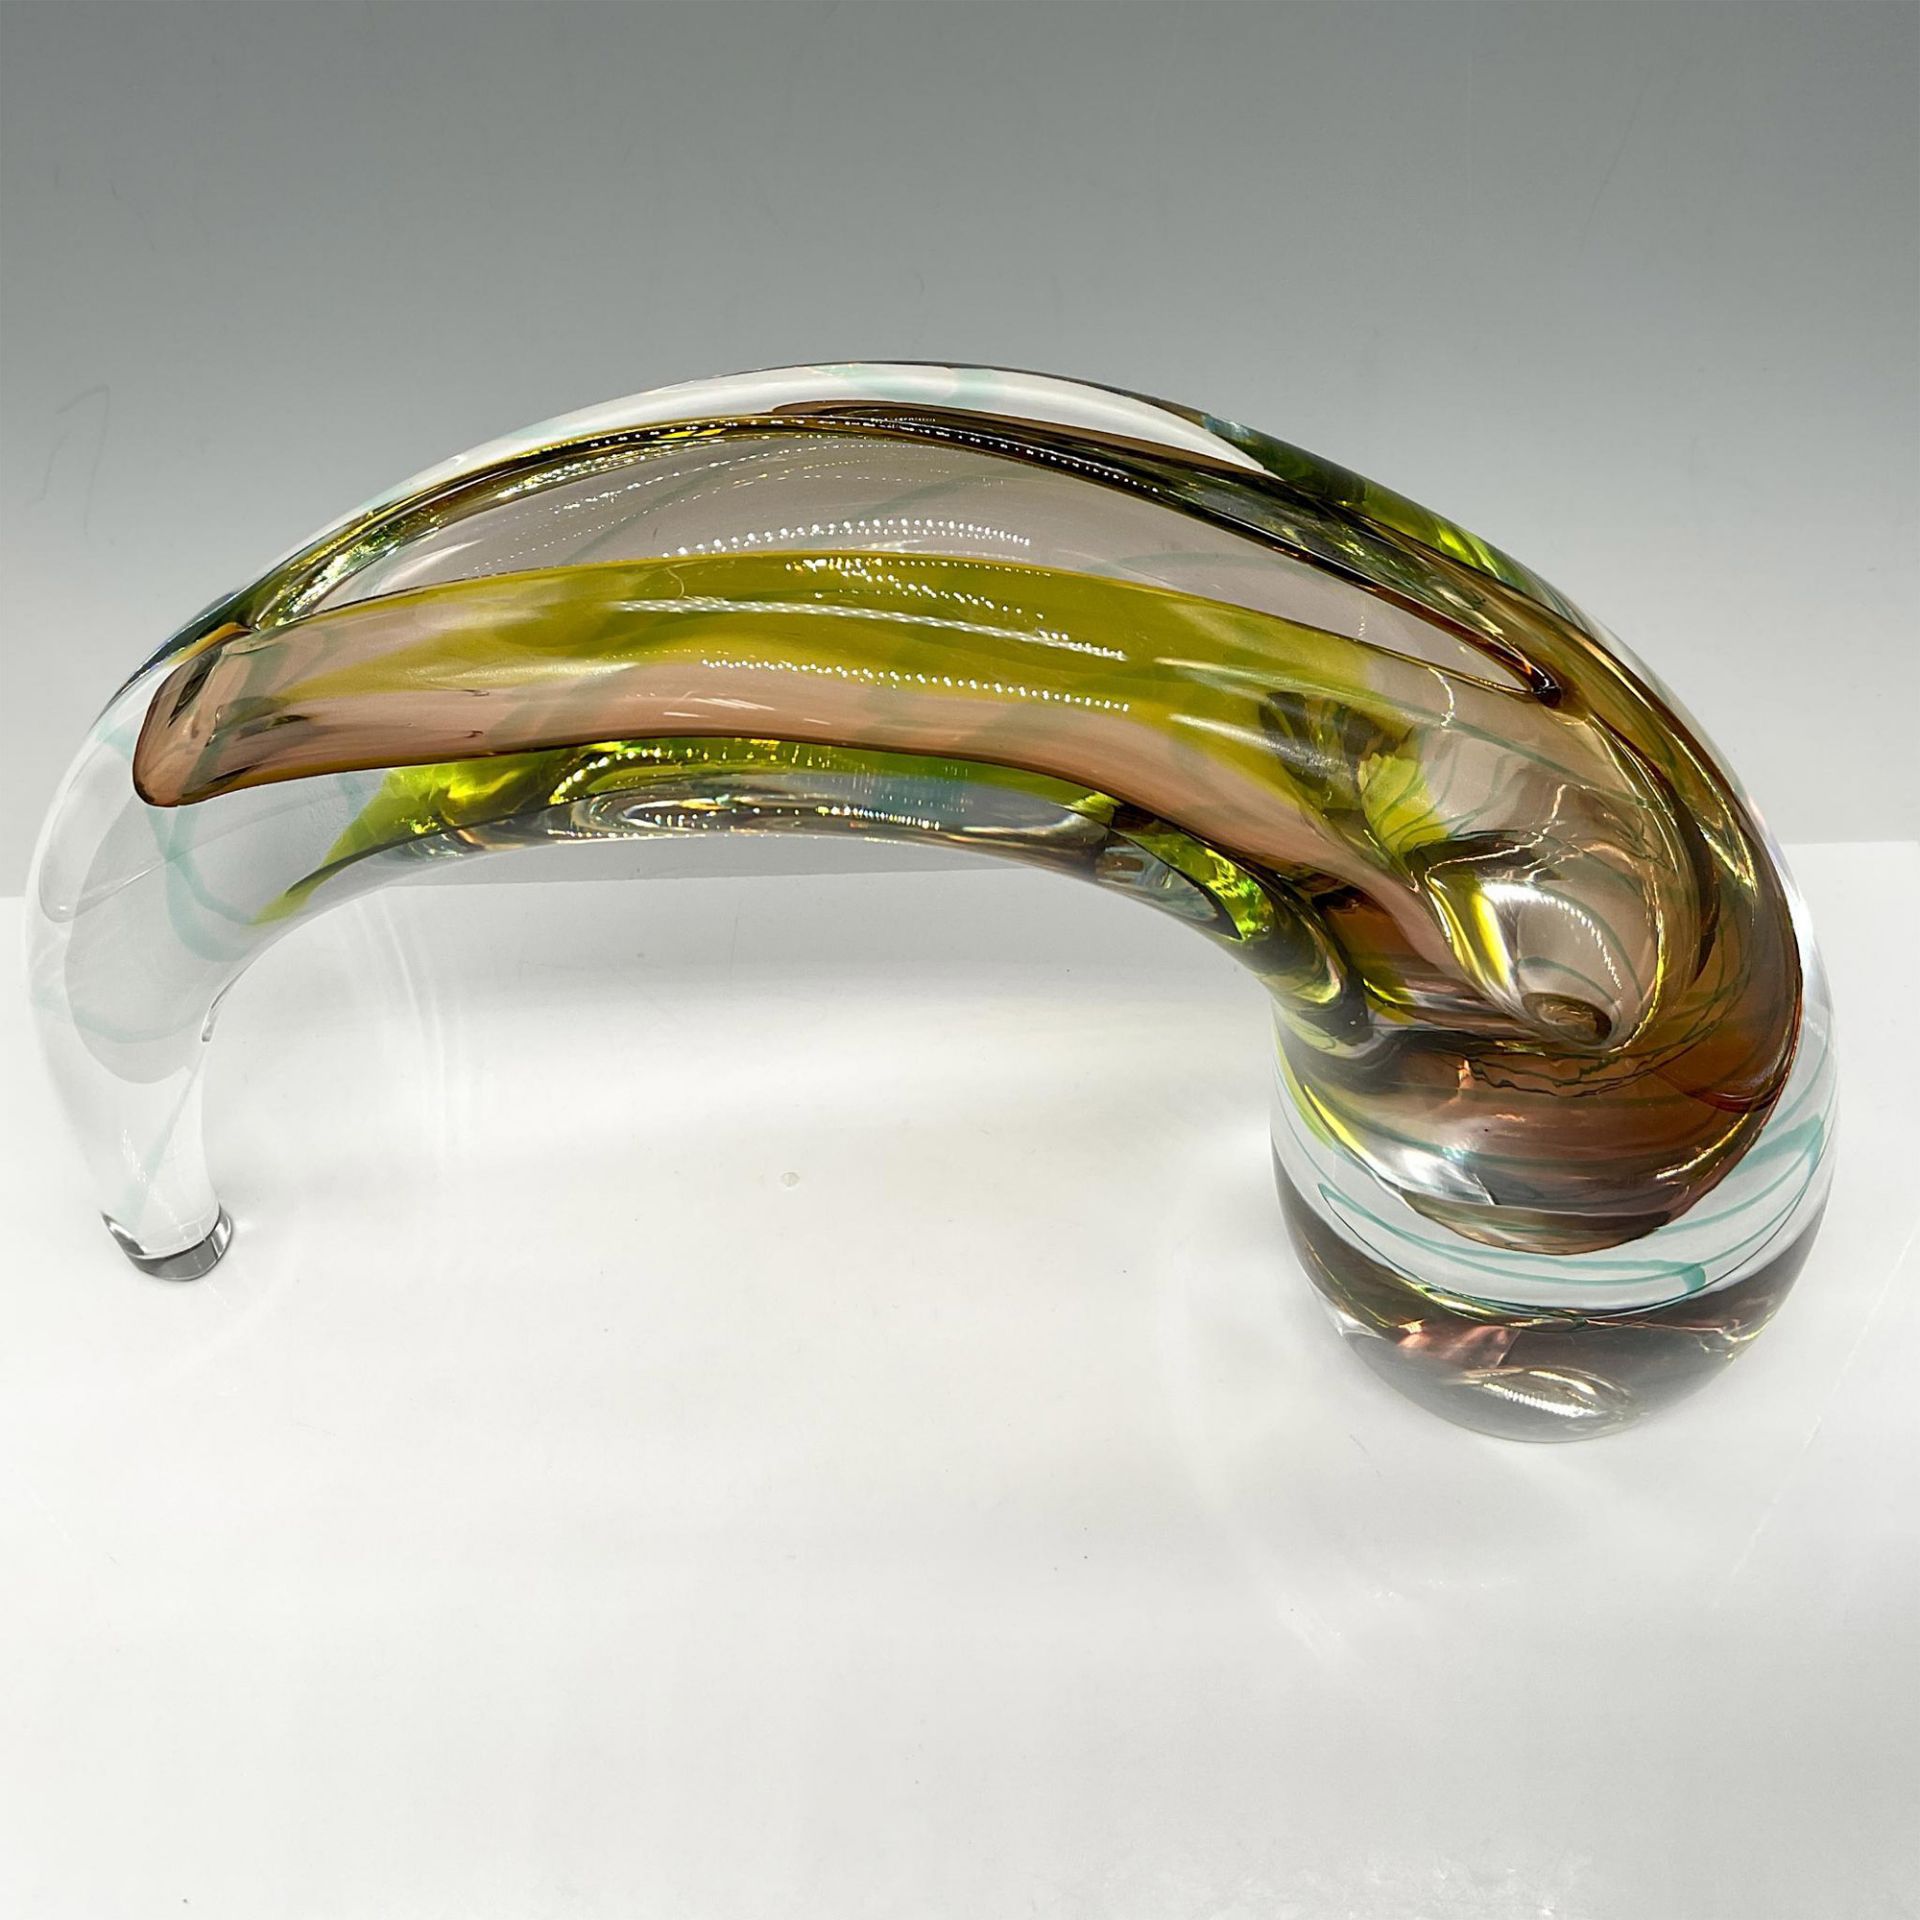 Evolution by Waterford Art Glass Sculpture Vase, Sea Breeze - Image 2 of 5